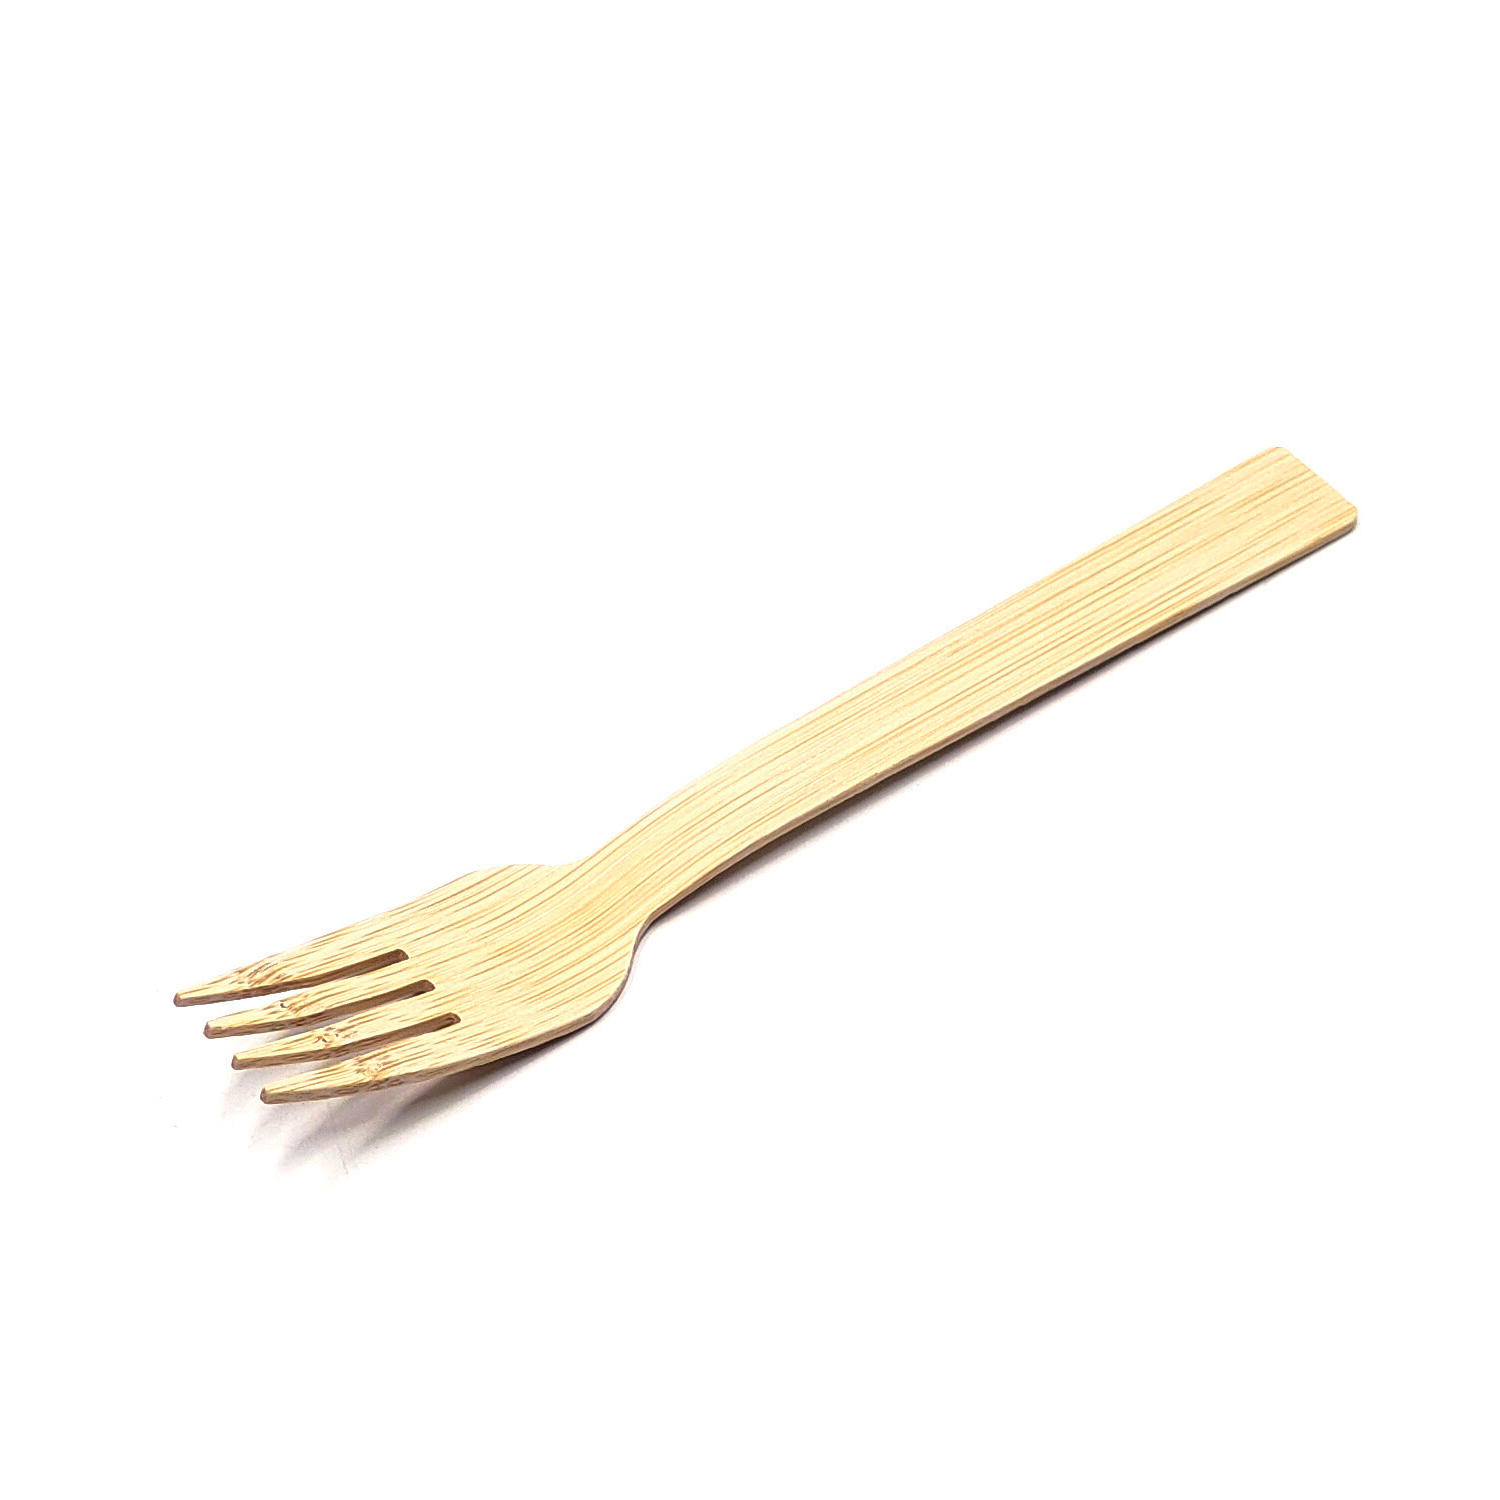 Discover the eco-friendly alternative to plastic forks - biodegradable forks